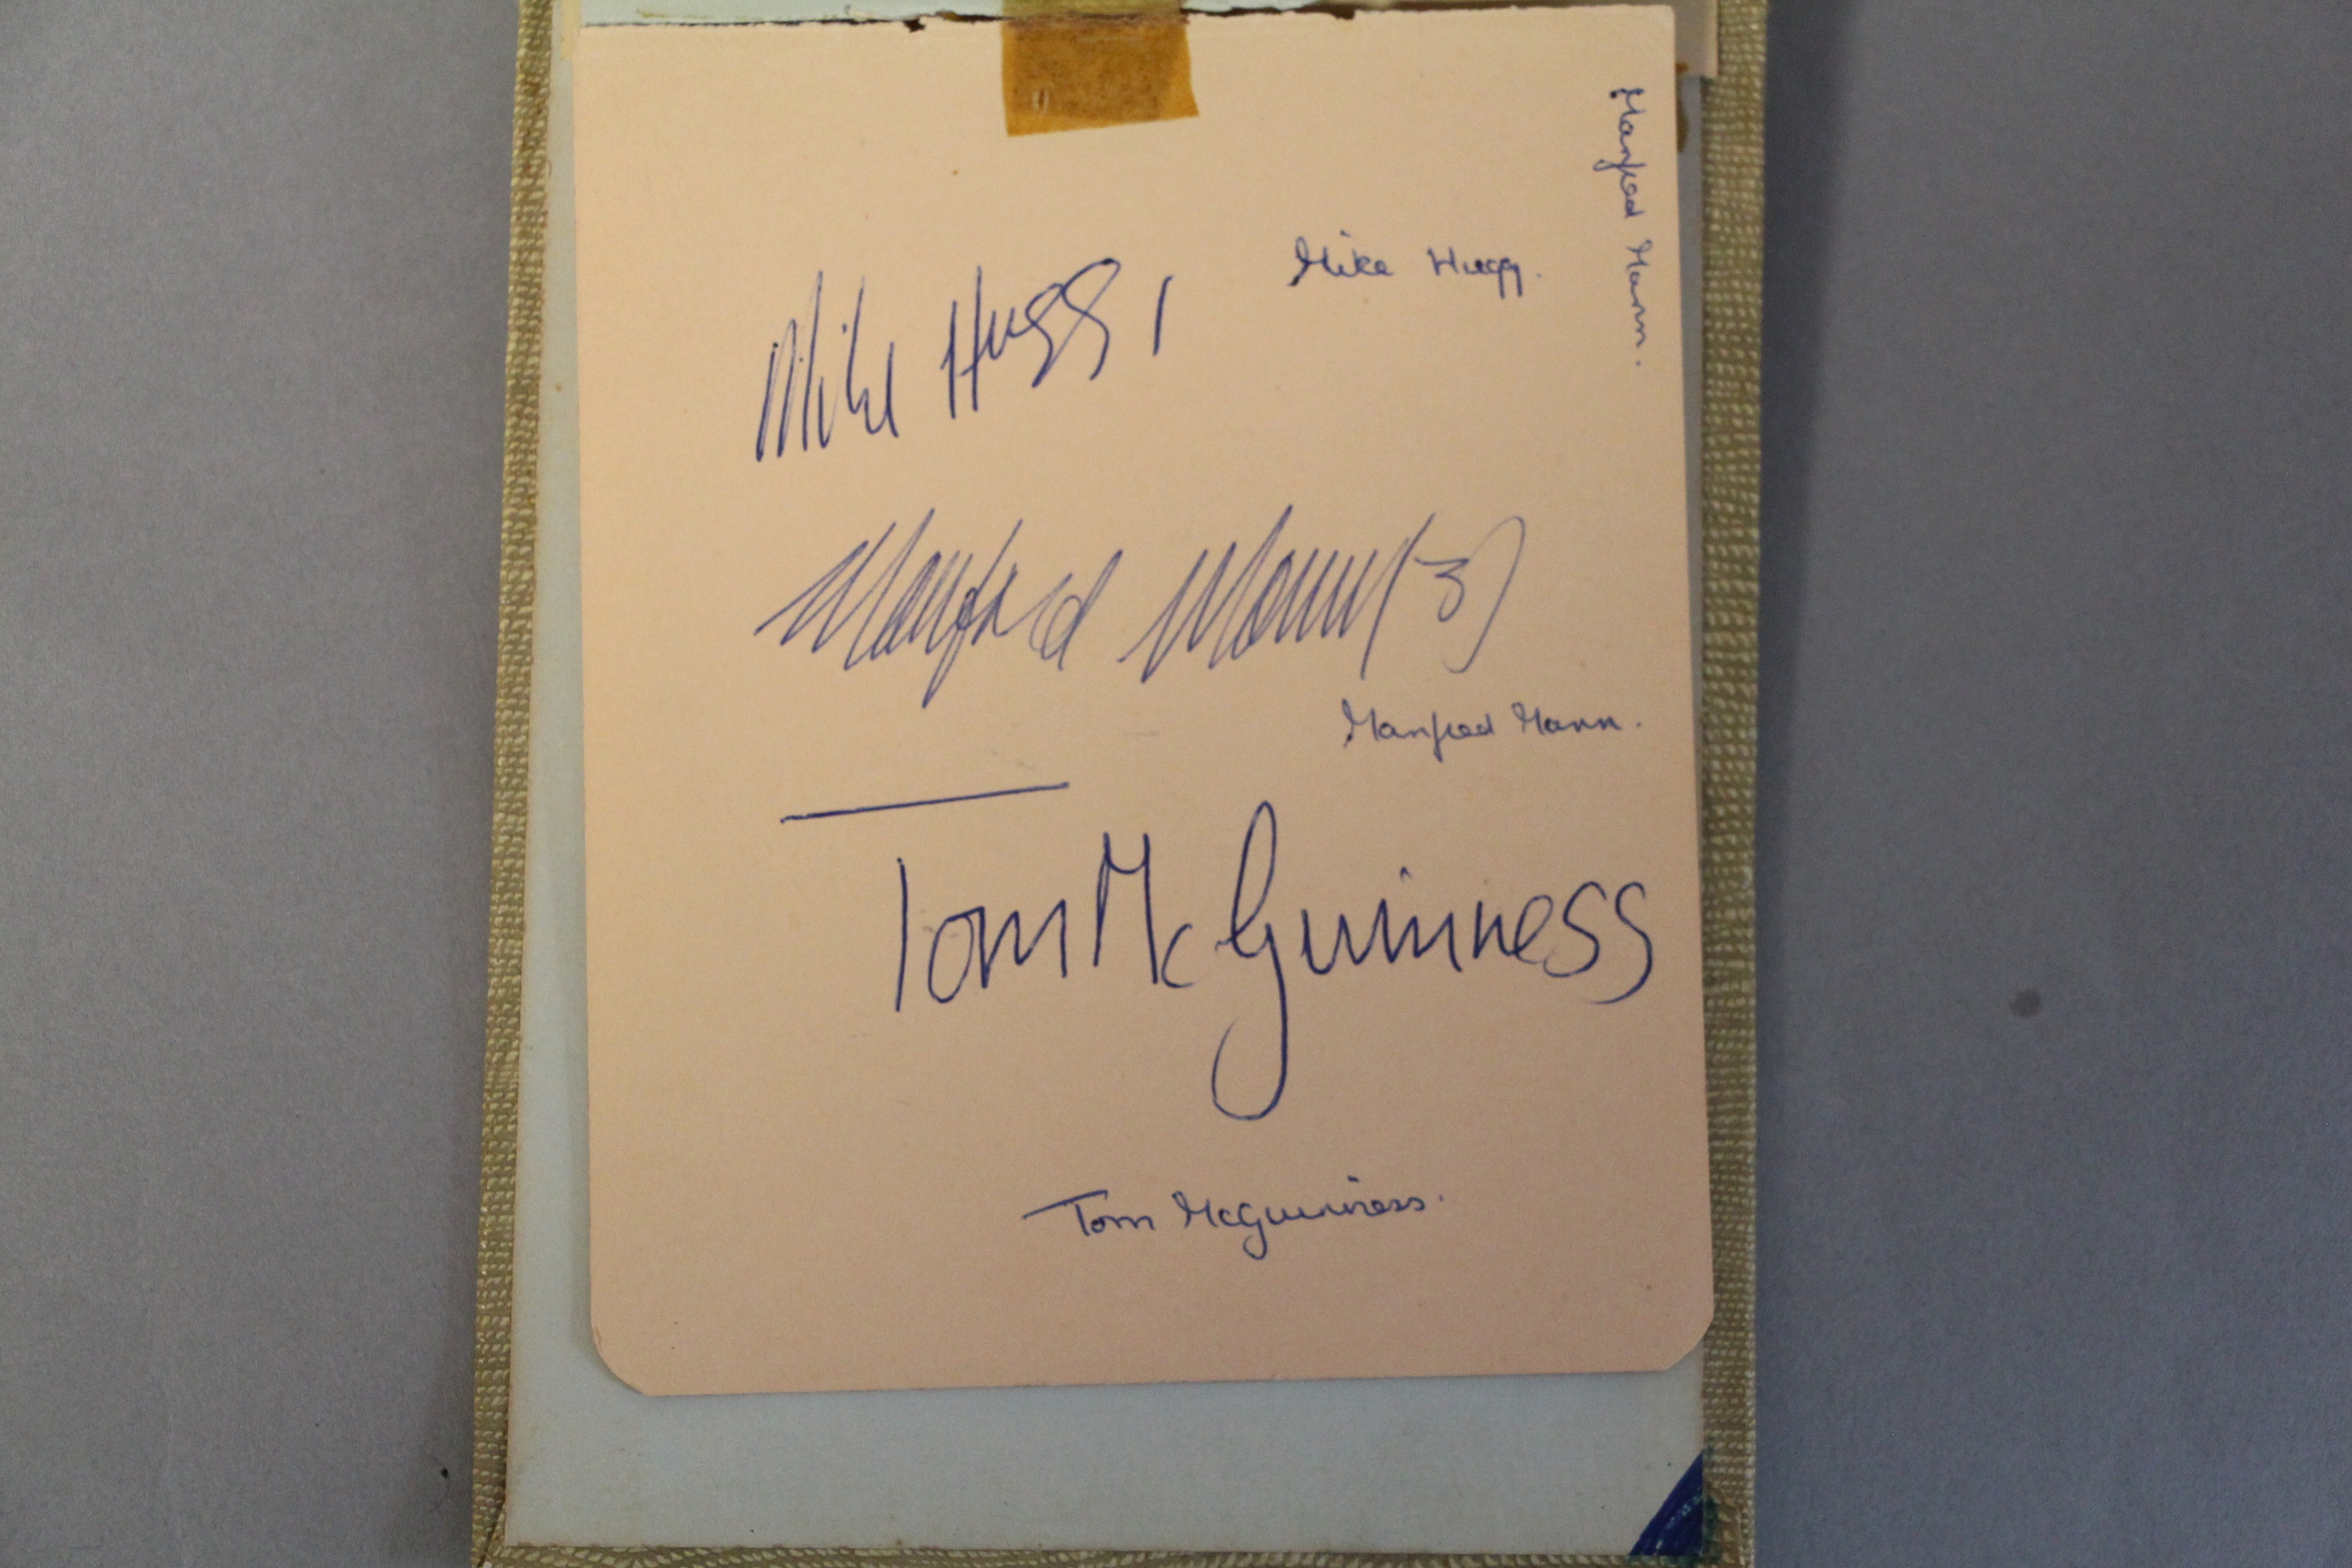 An Autograph book collected by a lady called Jill F whose full name and address appears in the book - Image 16 of 17